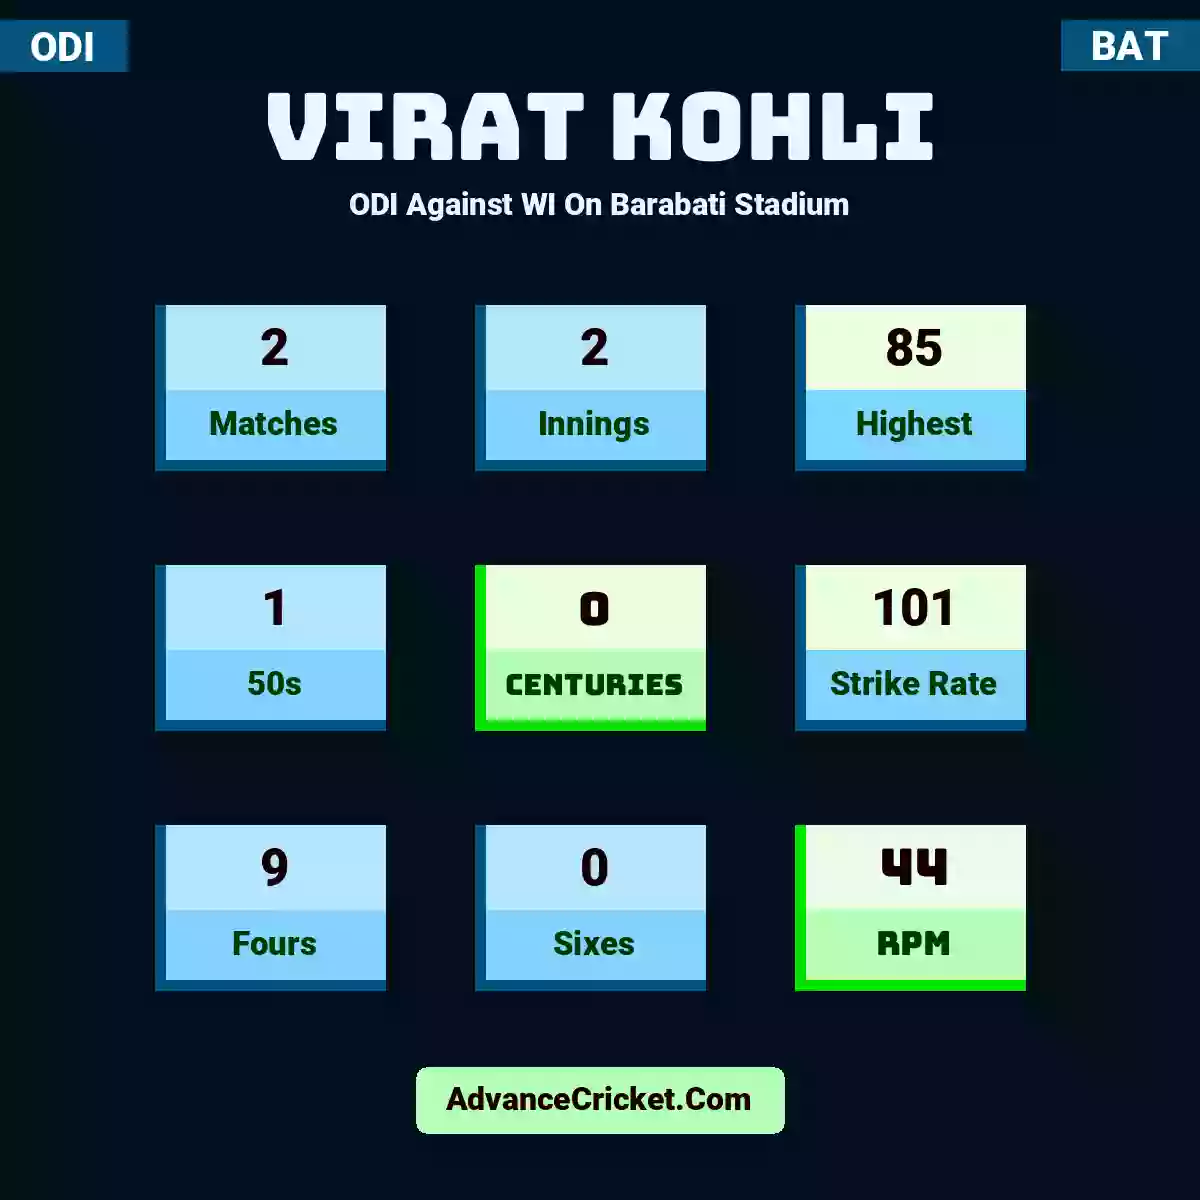 Virat Kohli ODI  Against WI On Barabati Stadium, Virat Kohli played 2 matches, scored 85 runs as highest, 1 half-centuries, and 0 centuries, with a strike rate of 101. V.Kohli hit 9 fours and 0 sixes, with an RPM of 44.